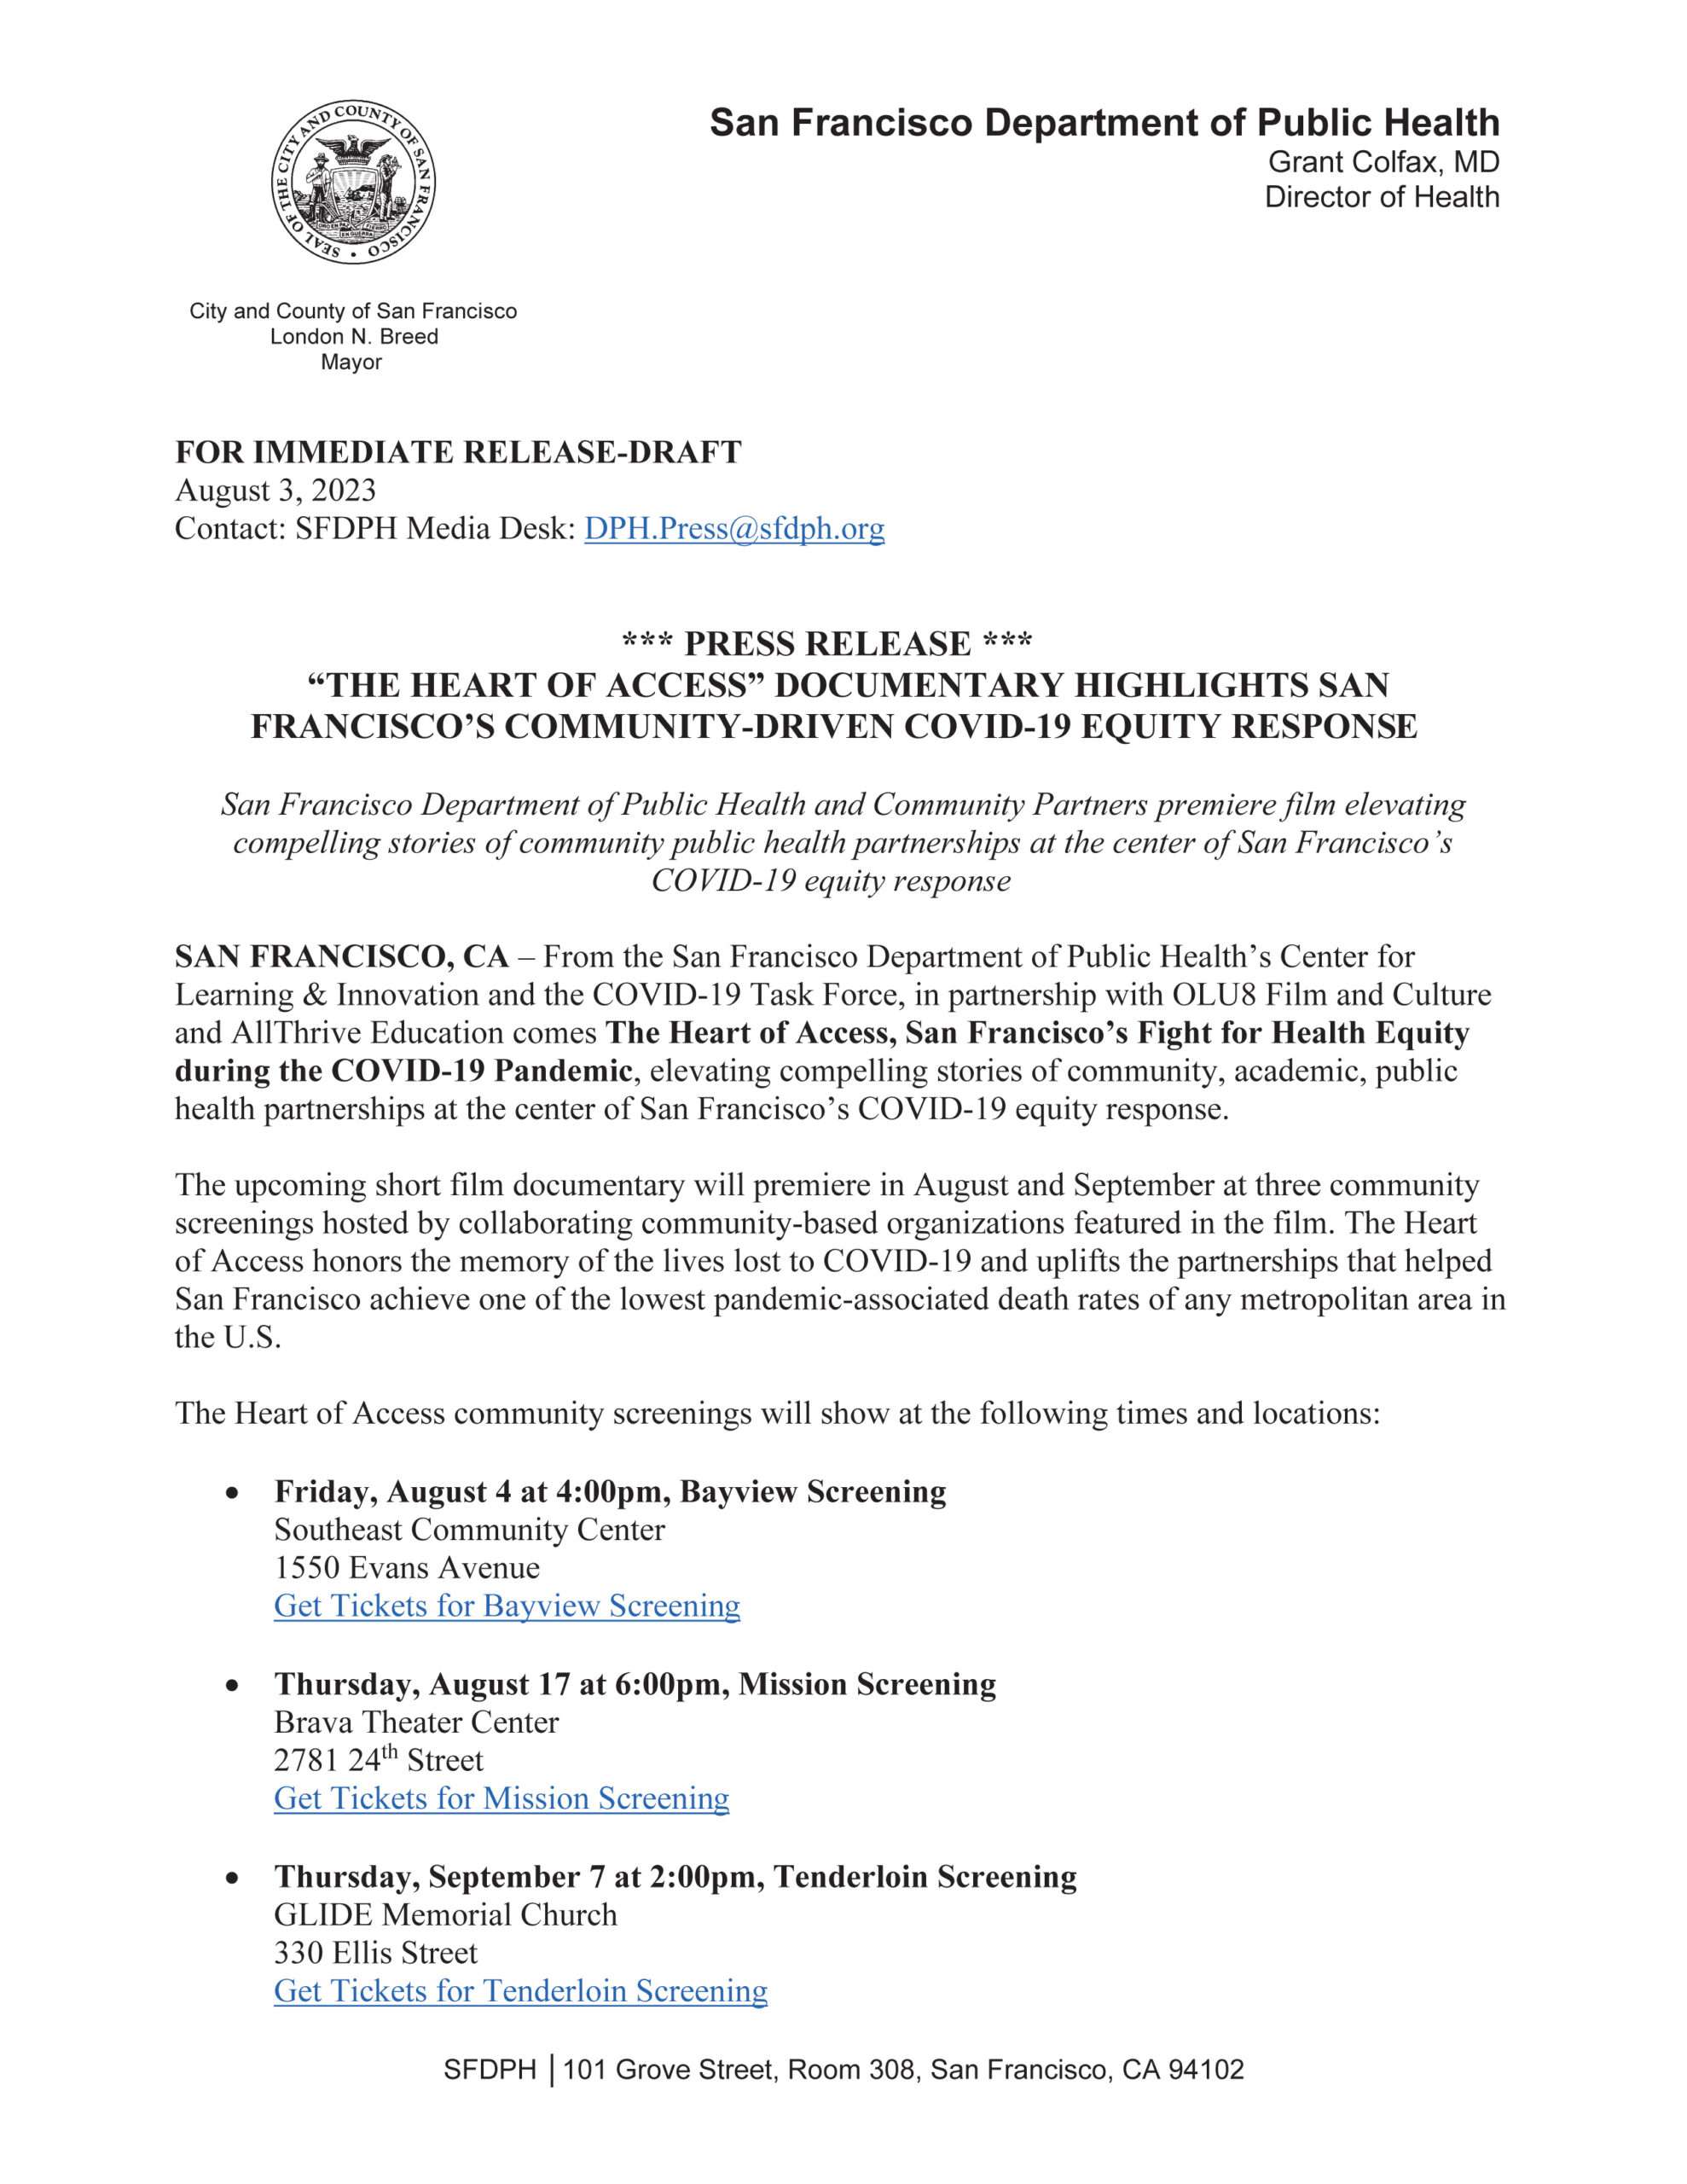 Heart of Access Press Release Page 1